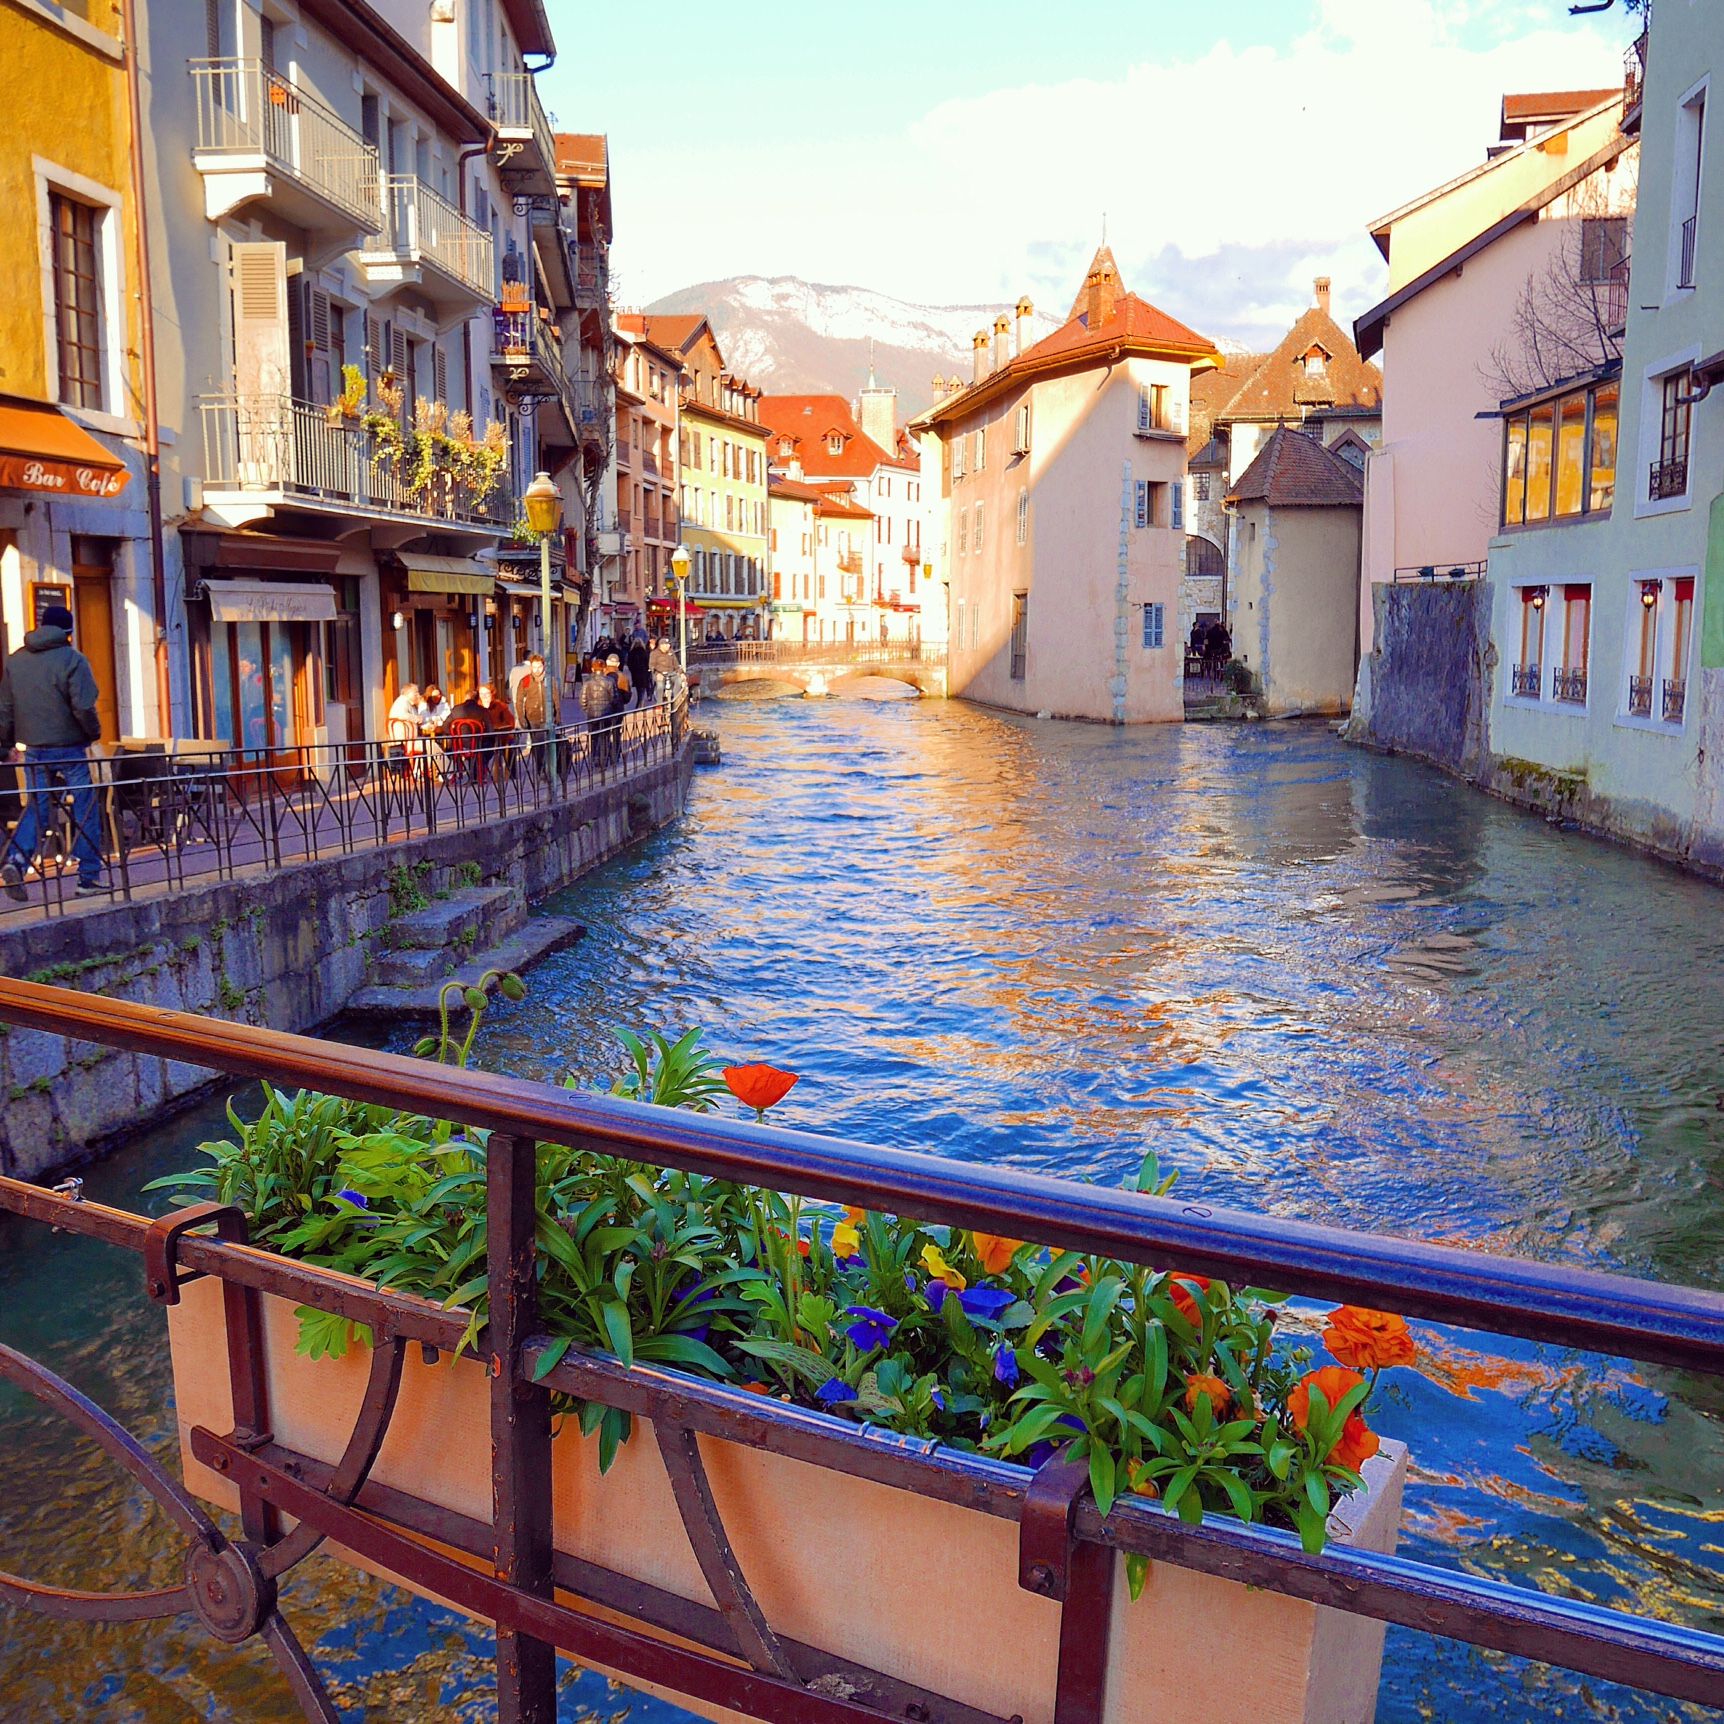 10 Reasons You Must Visit Annecy, France | Mont blanc, France and ...